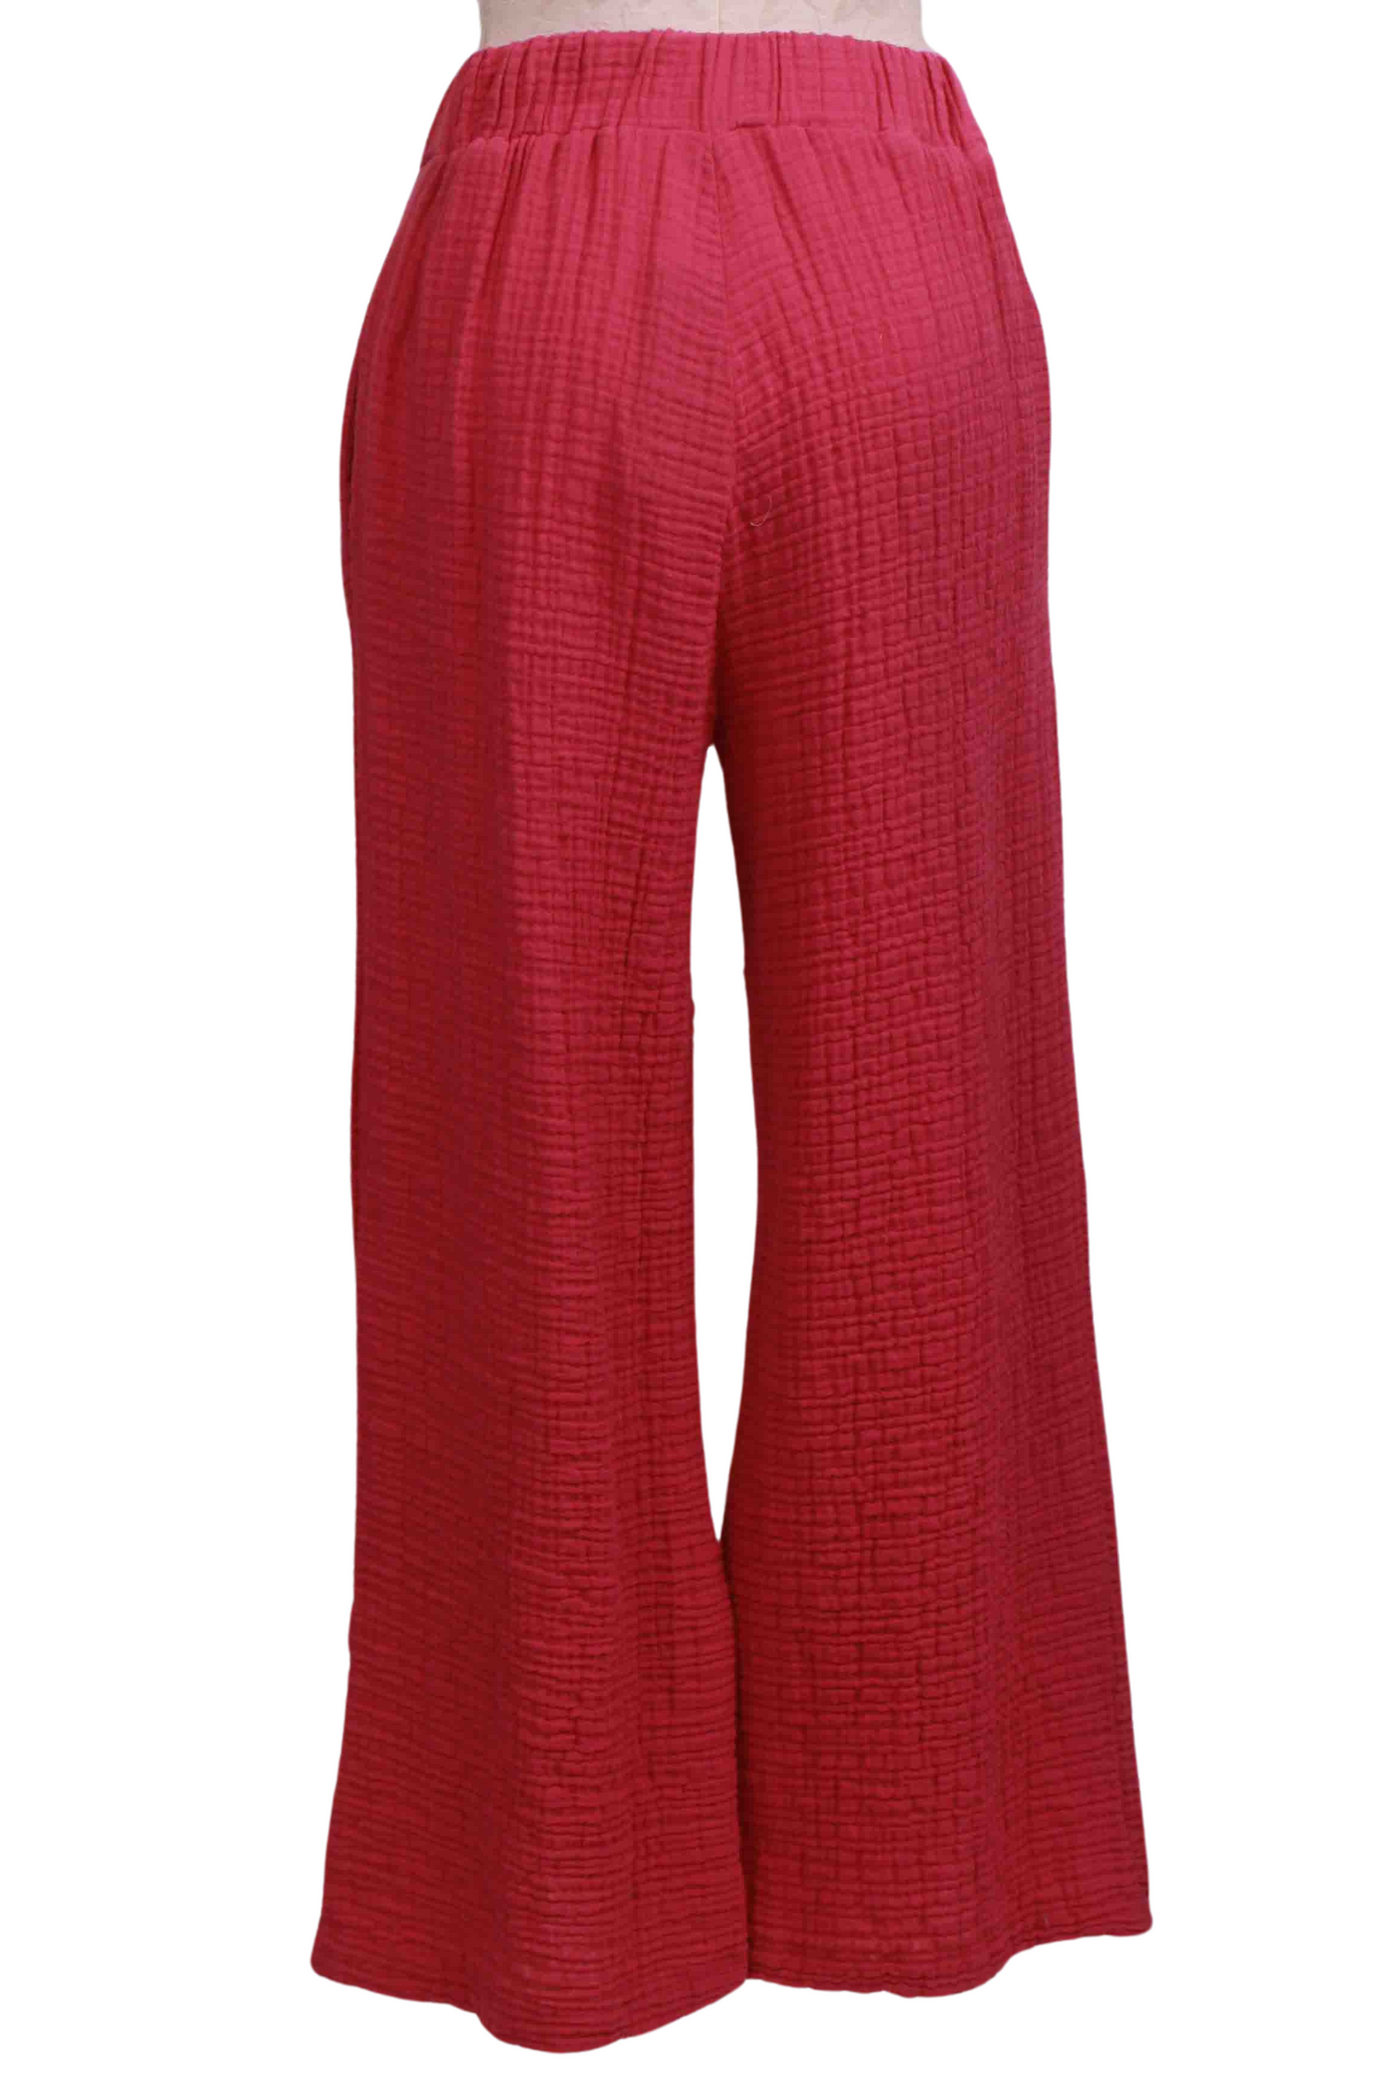 back view of Raspberry Harmony Gauzy Cotton Pant by Kozan with a vent detail at the hemline